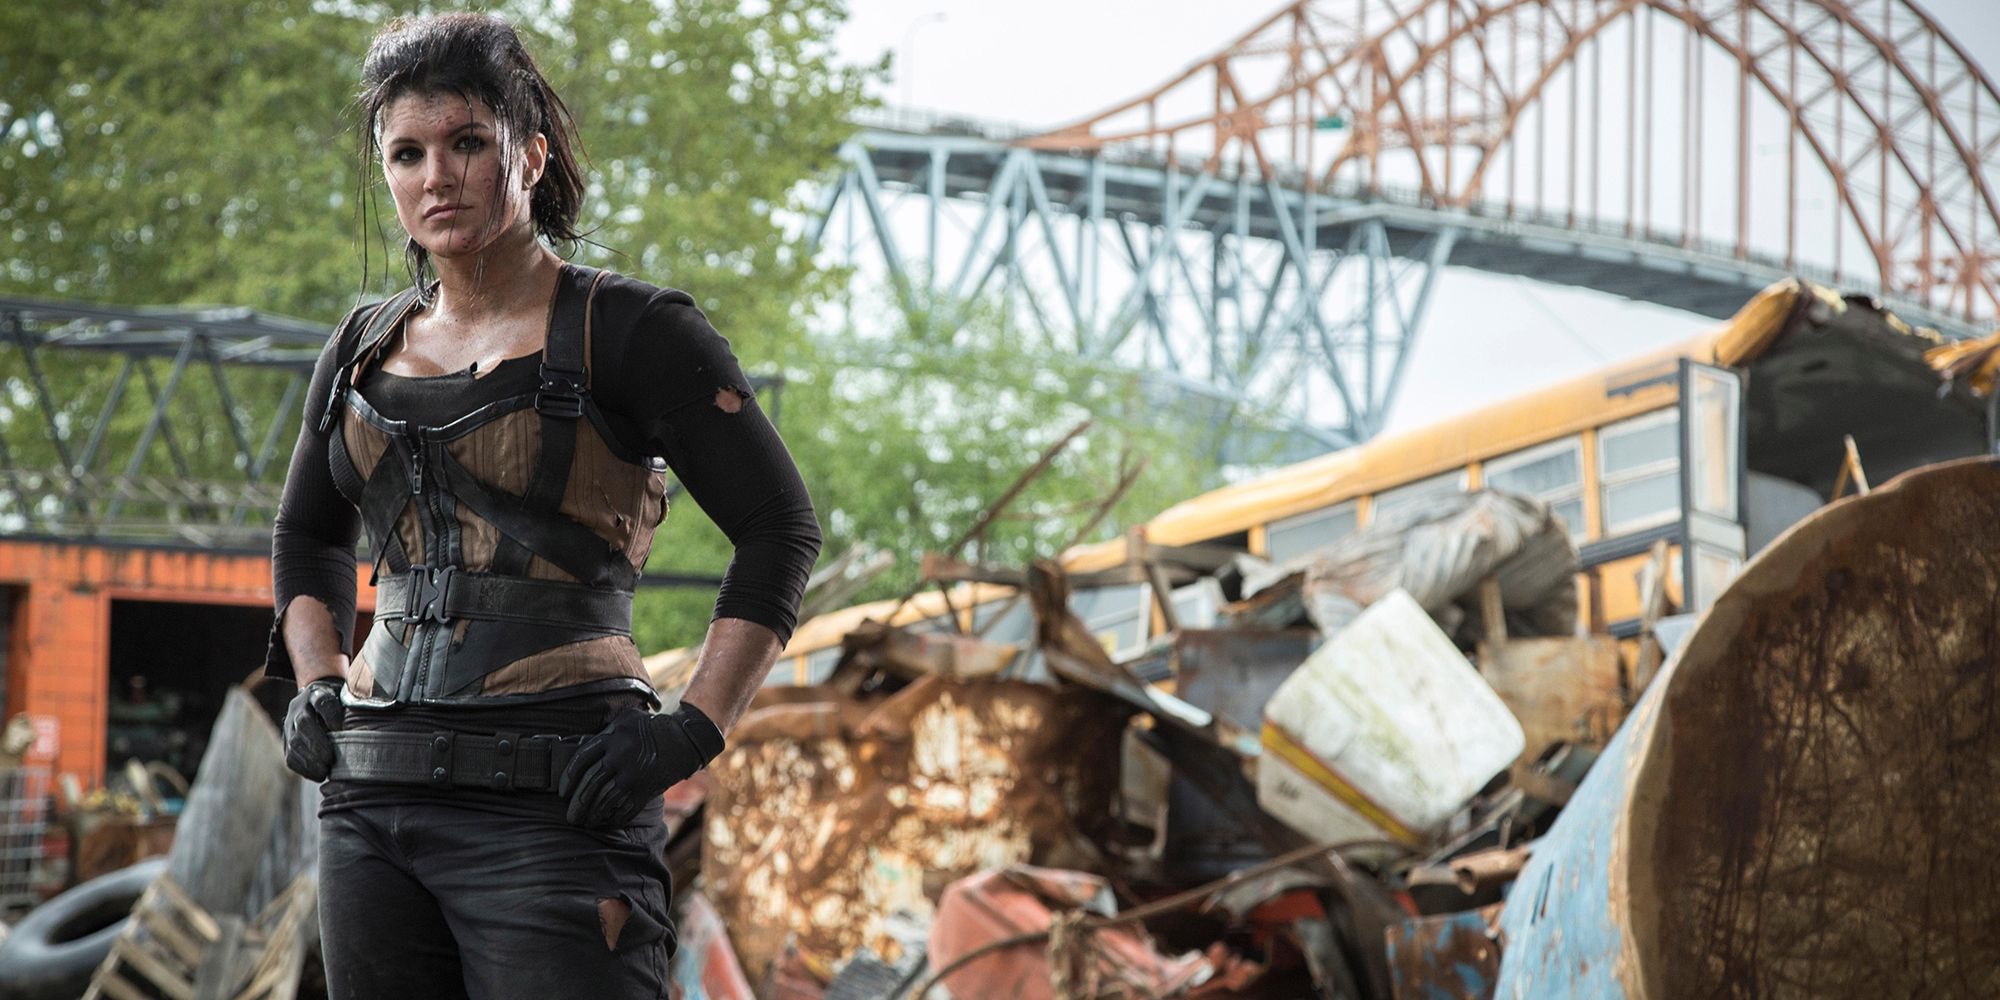 Gina Carano's Angel Dust stands in wreckage from Deadpool